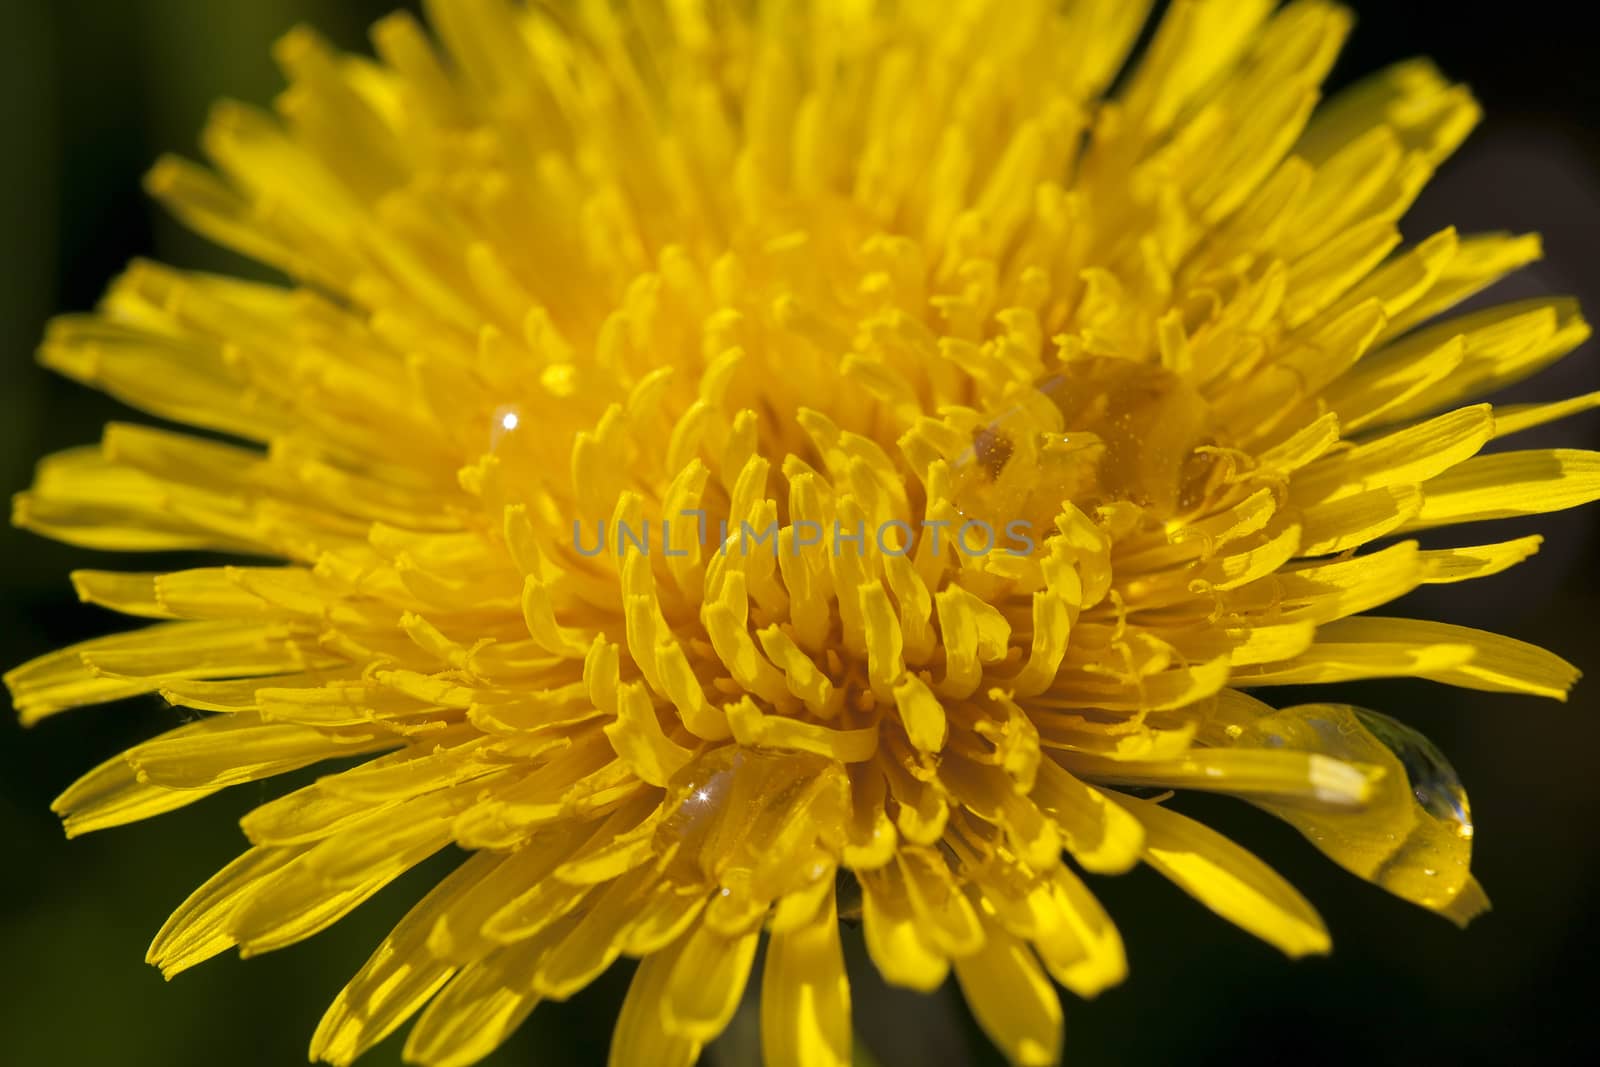 photographed close-up of yellow dandelions in springtime, shallow depth of field